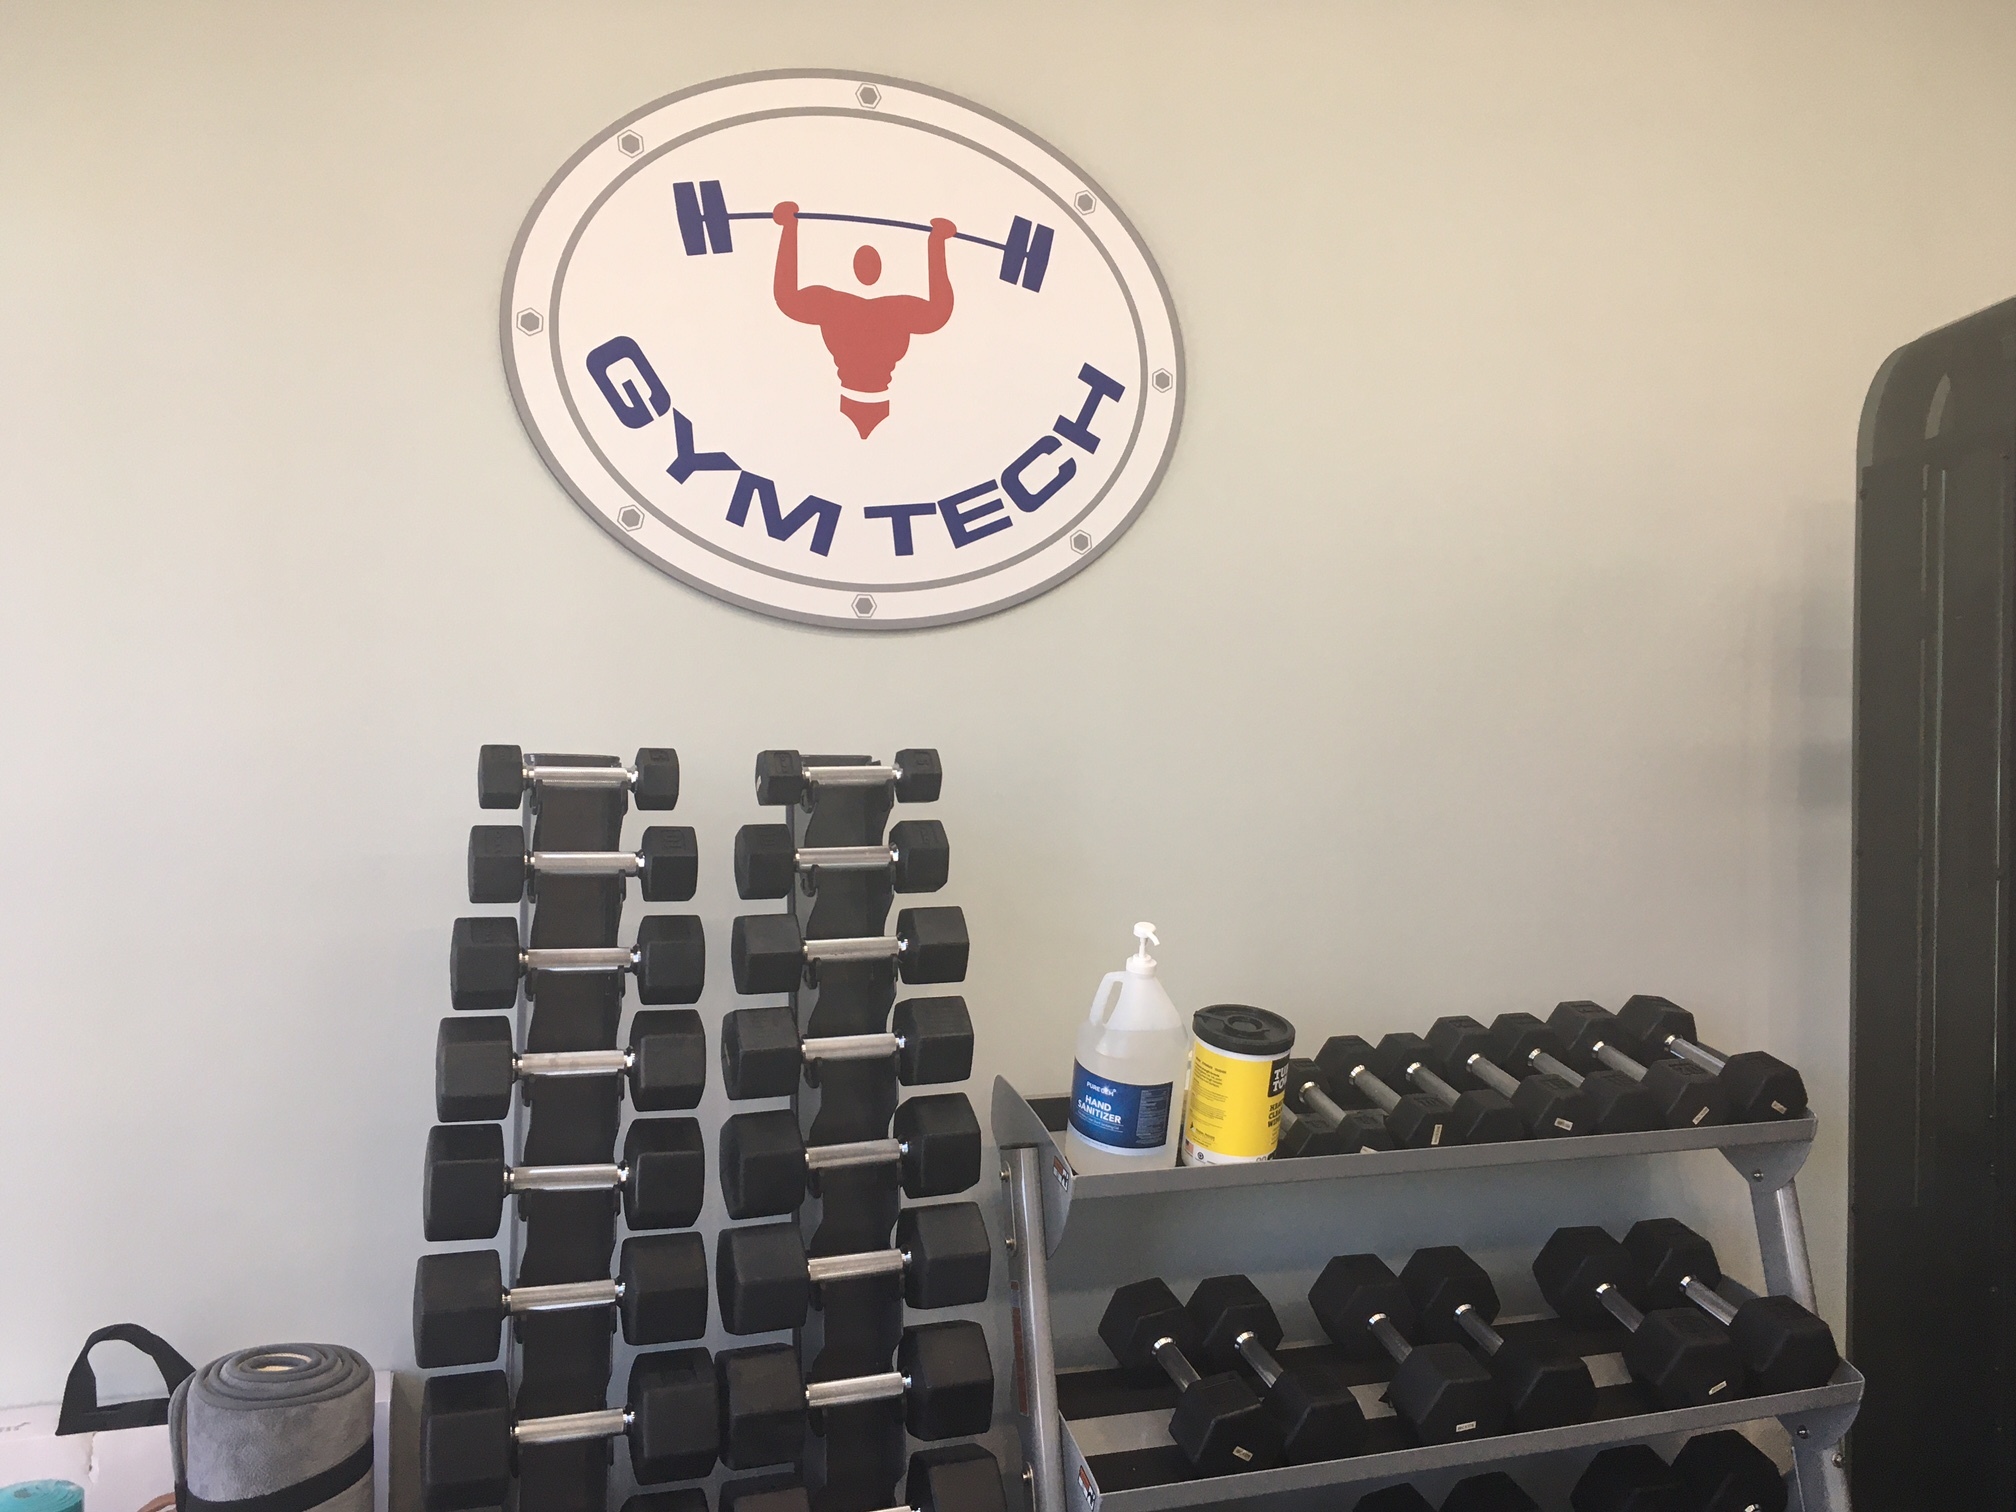 Free weights are just some of the Gym Tech offerings.